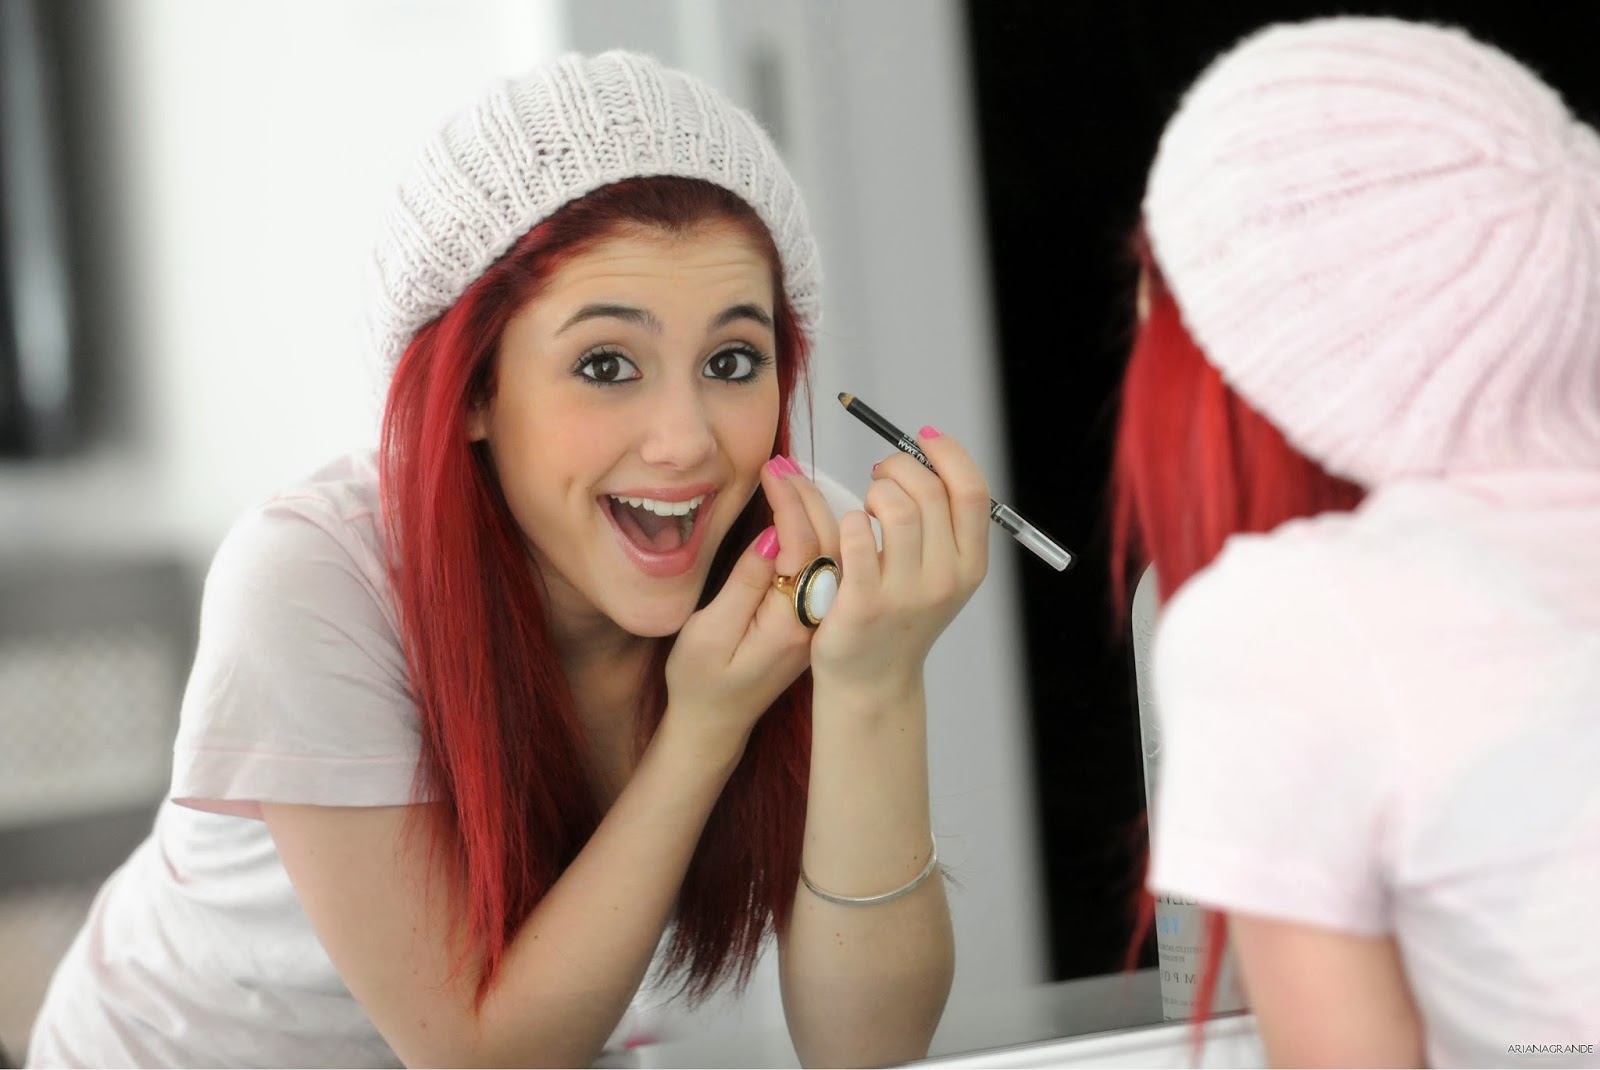 Star HD Wallpapers Free Download: Ariana Grande Hd Wallpapers Free ...